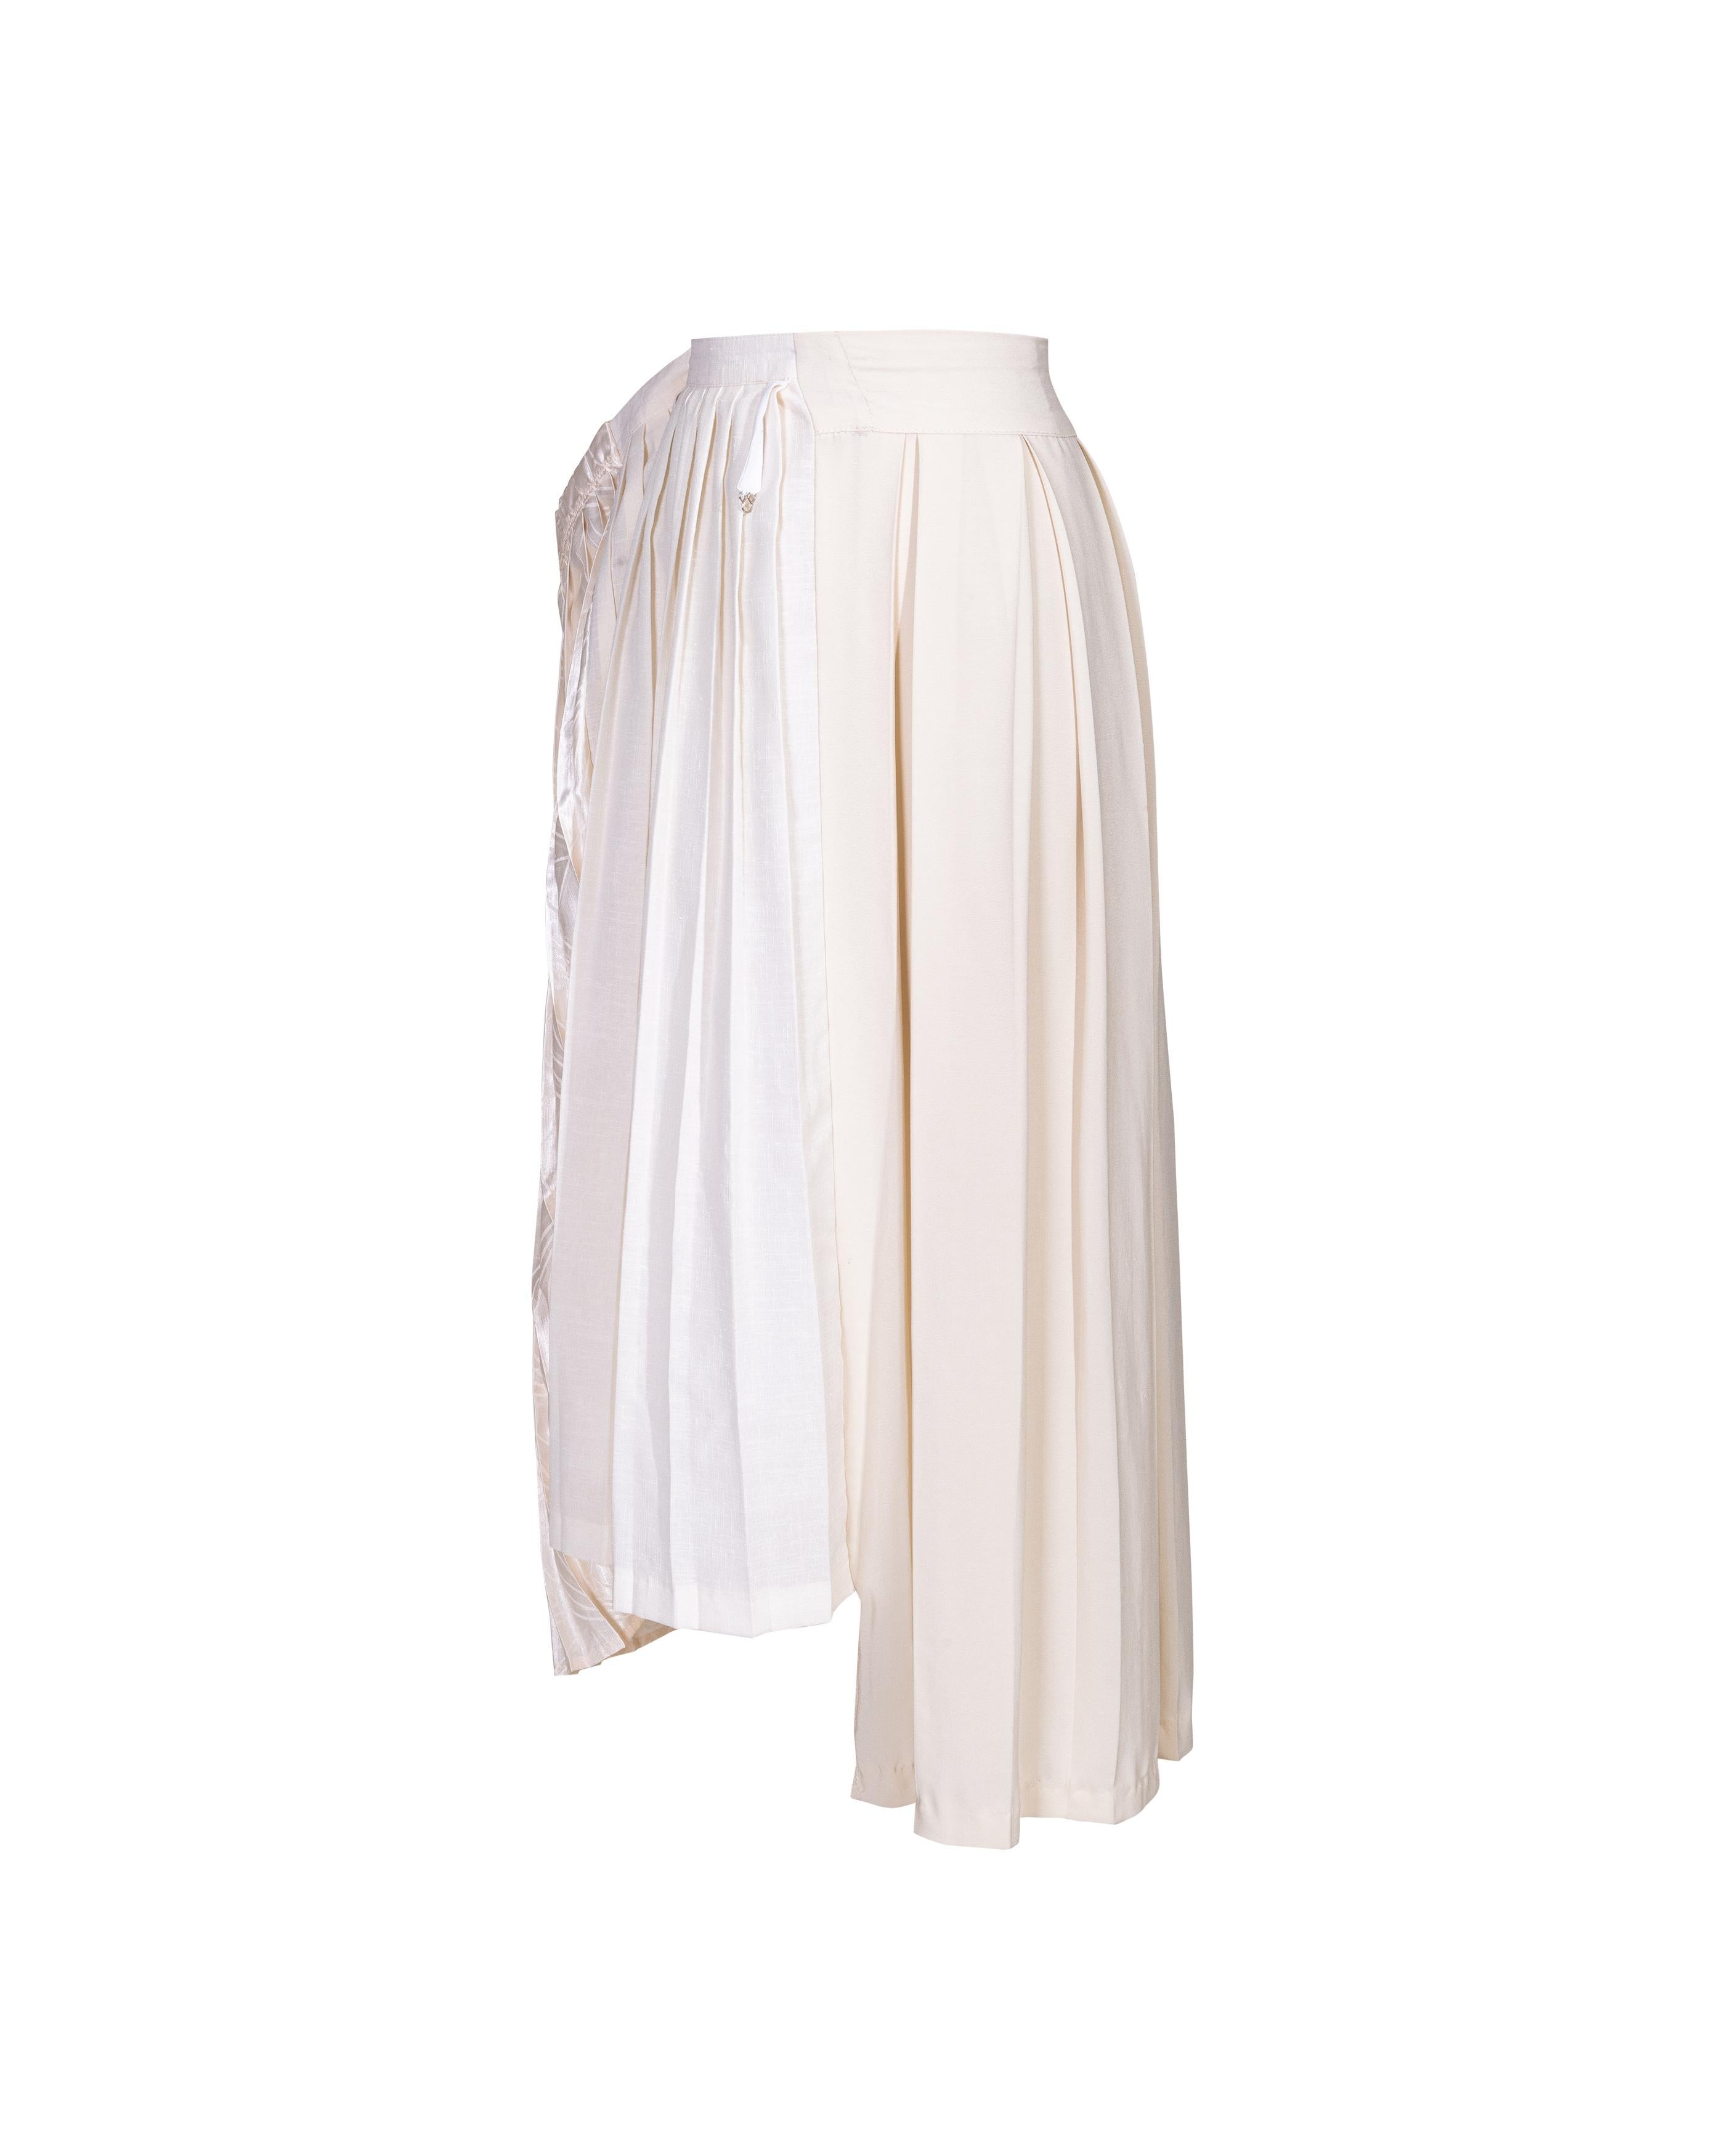 S/S 2001 Maison Martin Margiela One-of-One Artisanal Ecru Pleated Skirt In Good Condition In North Hollywood, CA